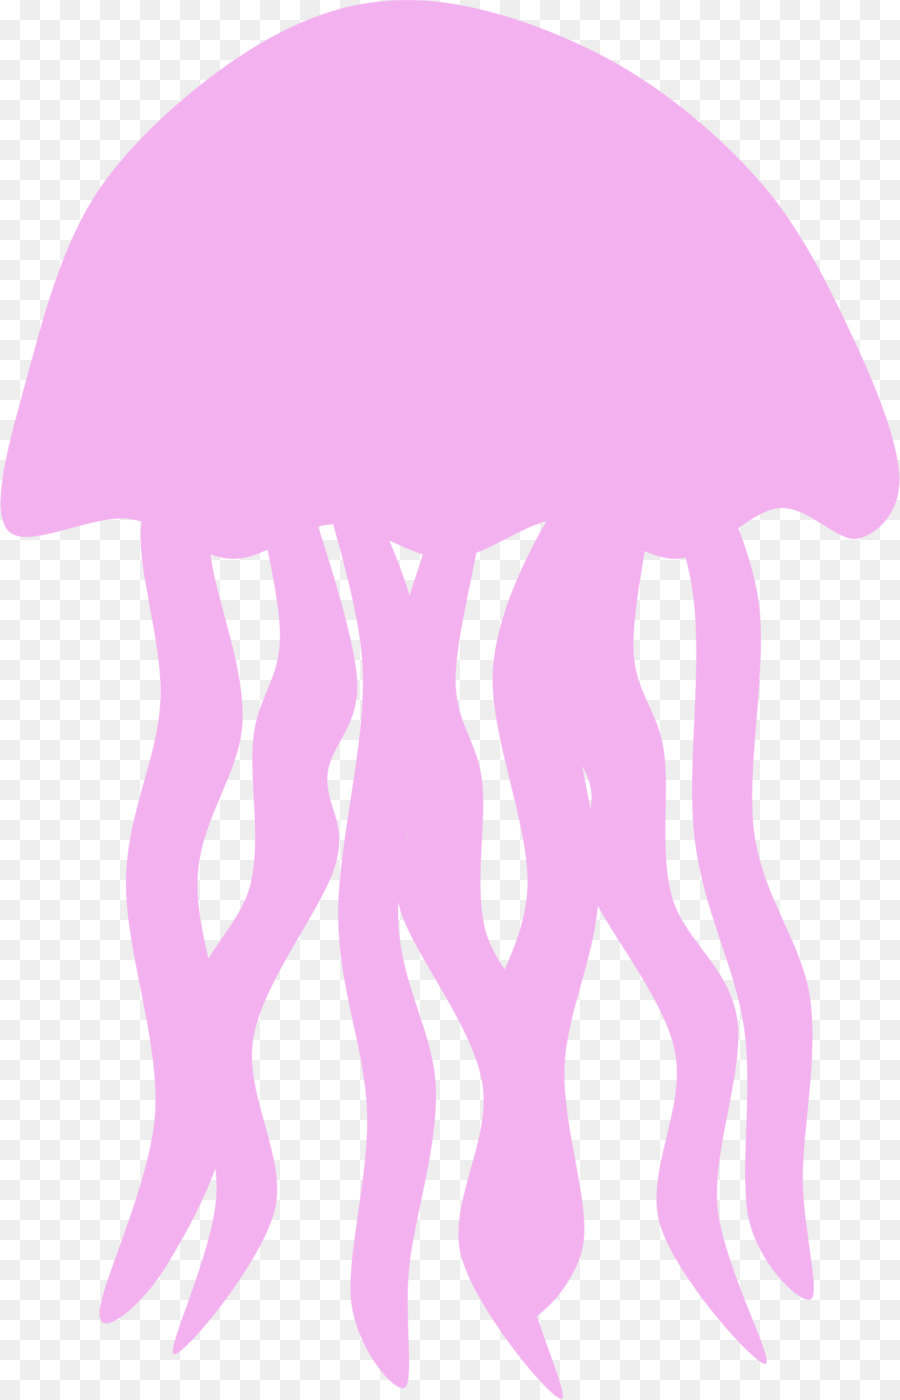 Jellyfish Clip art - under sea png download - 1494*2322 - Free Transparent Jellyfish png Download.